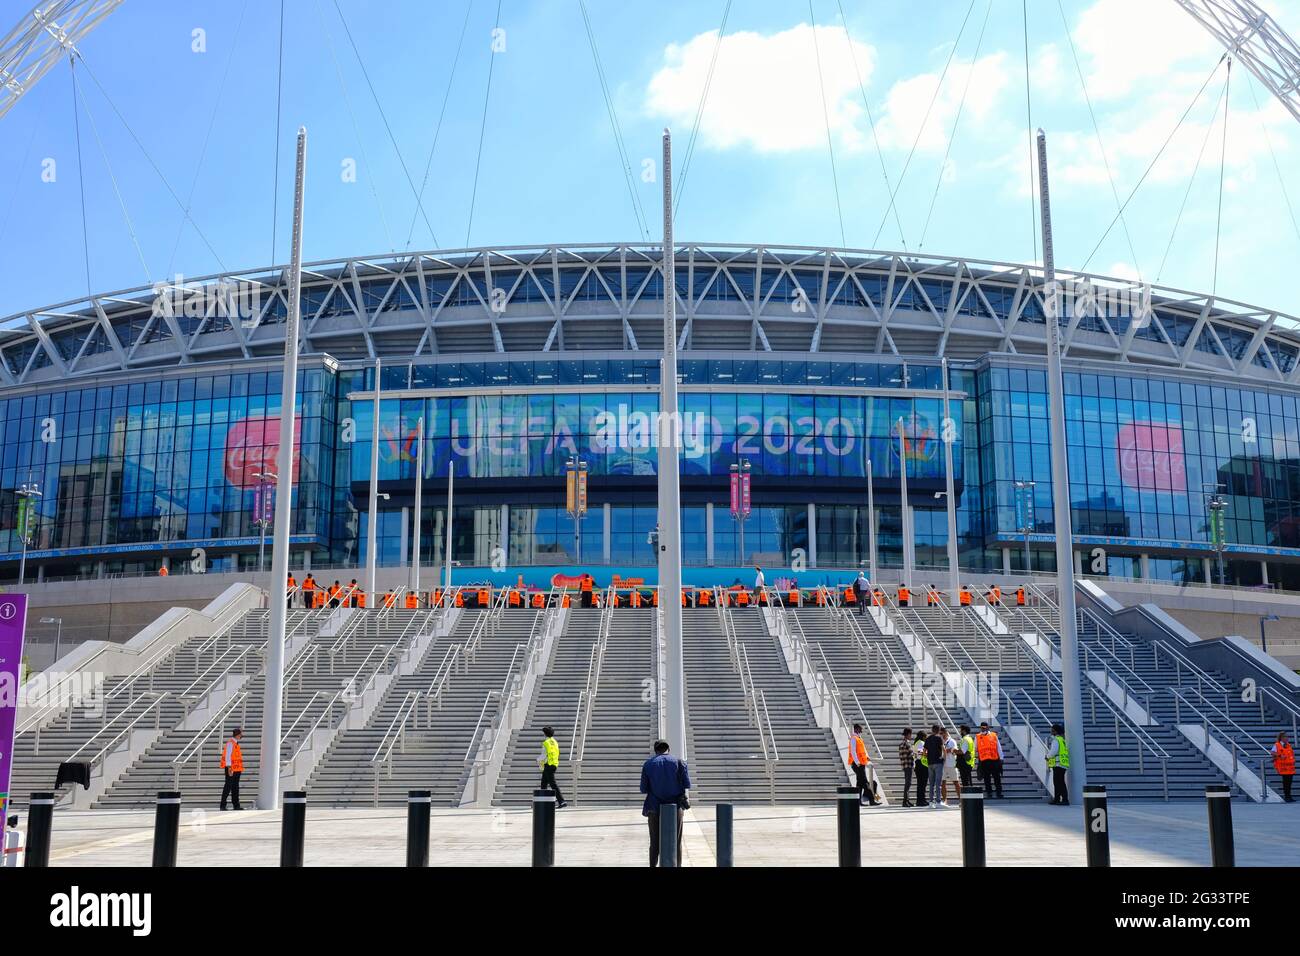 London, UK. The exterior of Wembley stadium on a sunny day. 'Euro 2020' is displayed on the board as venue hosts eight matches during the tournament. Stock Photo